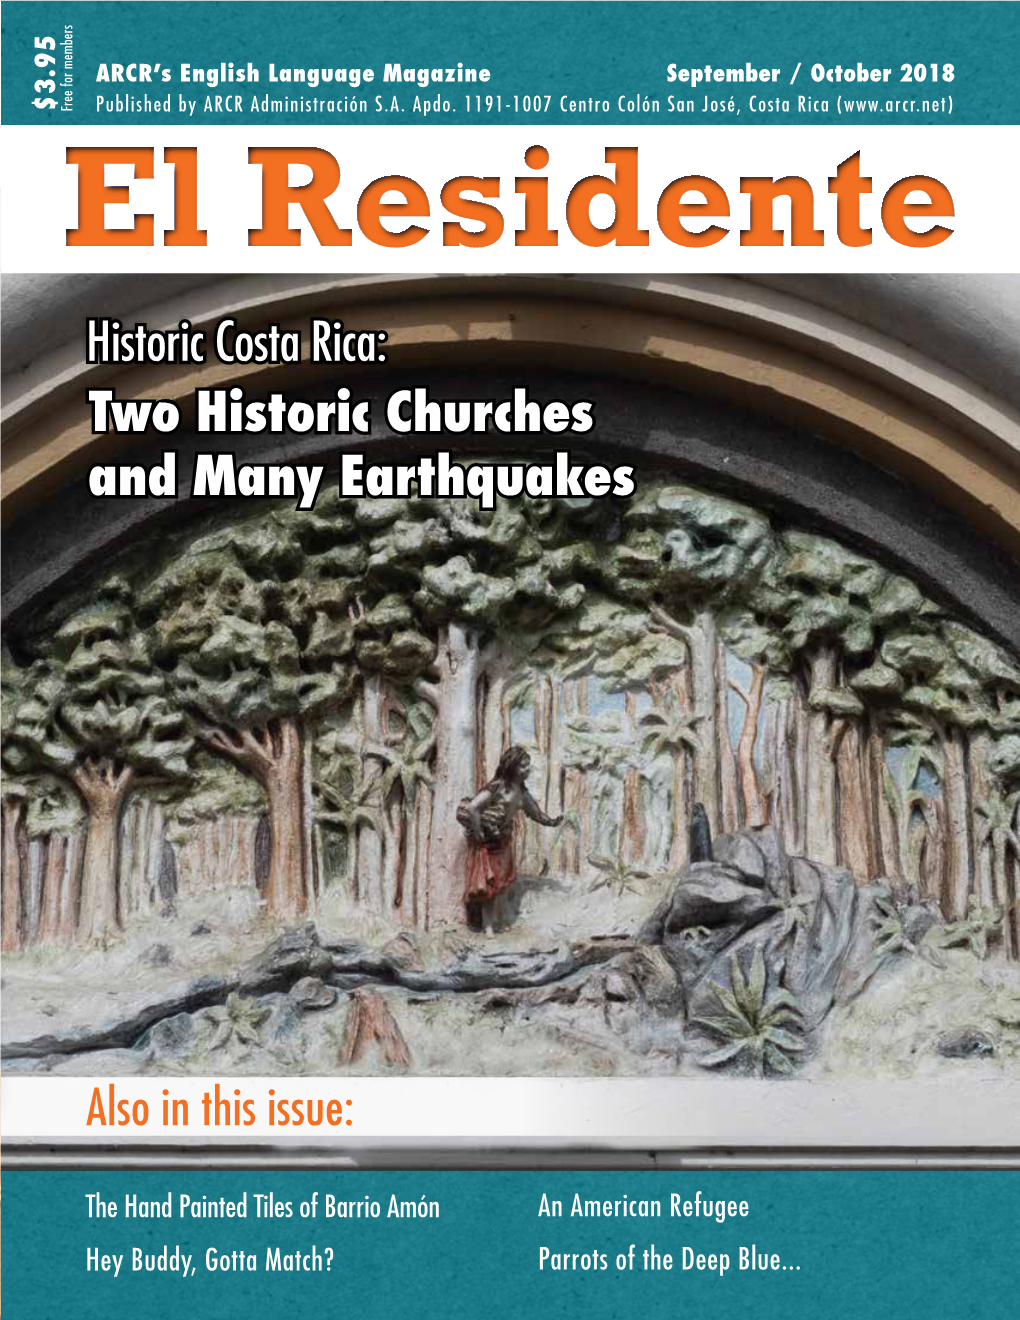 Historic Costa Rica: Two Historic Churches and Many Earthquakes